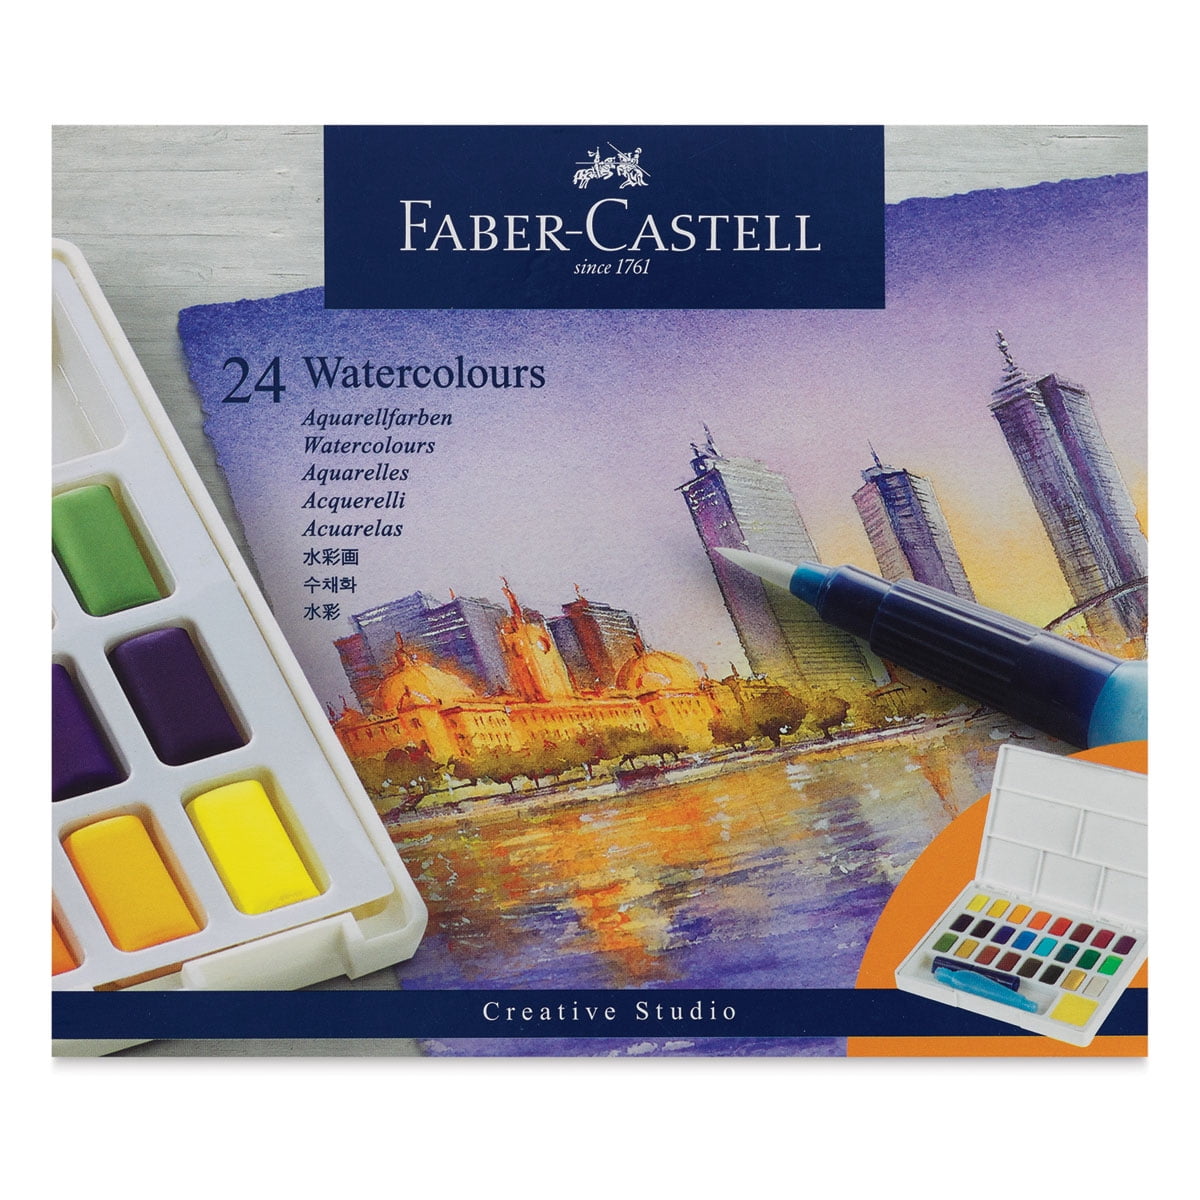 Faber-Castell Paint By Number Watercolor Set – dabblesack